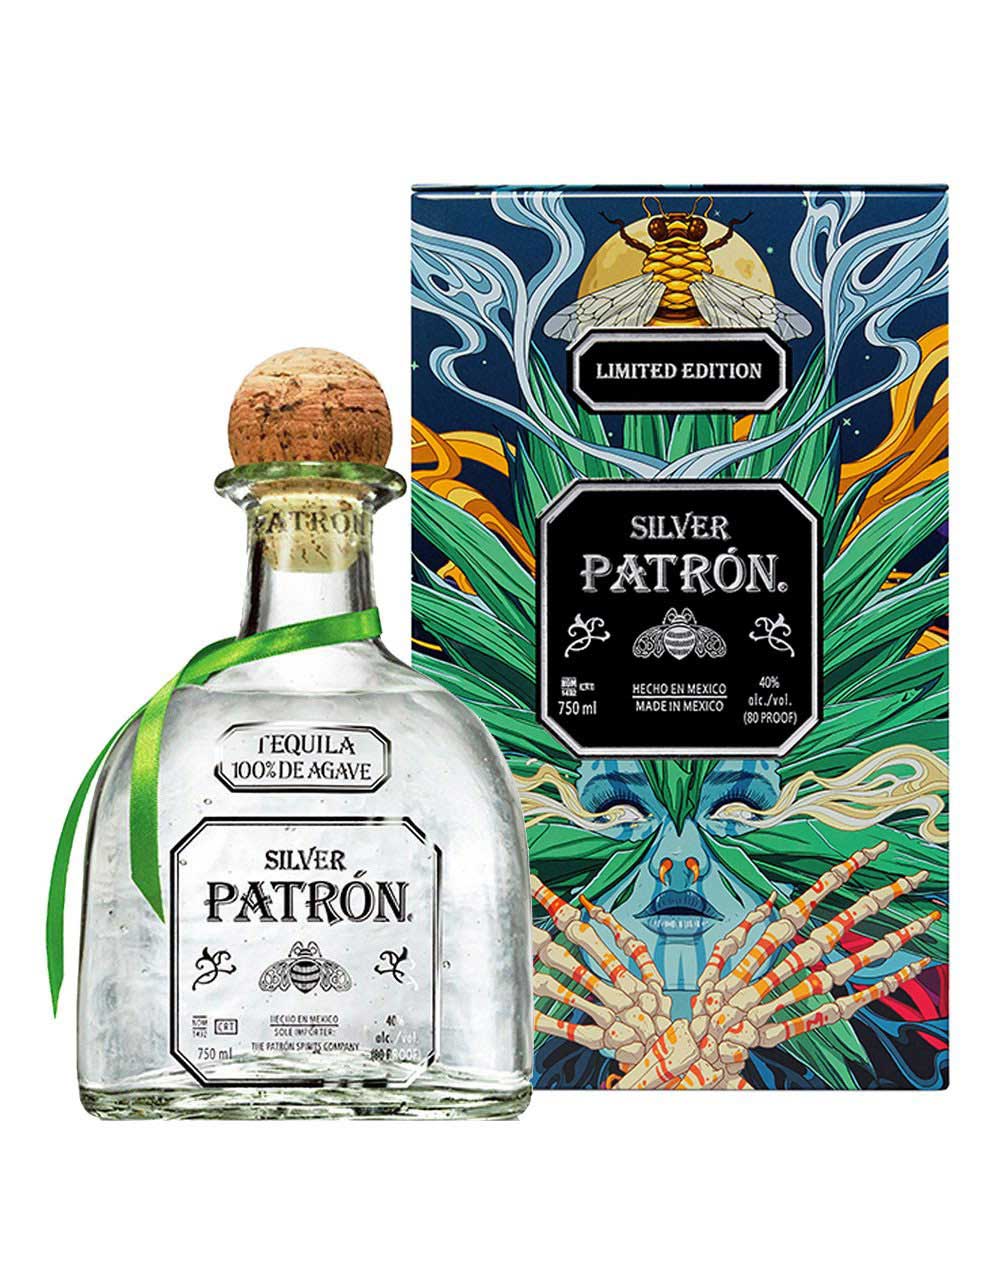 Patron Silver Limited Edition Mexican Heritage Tin 2020